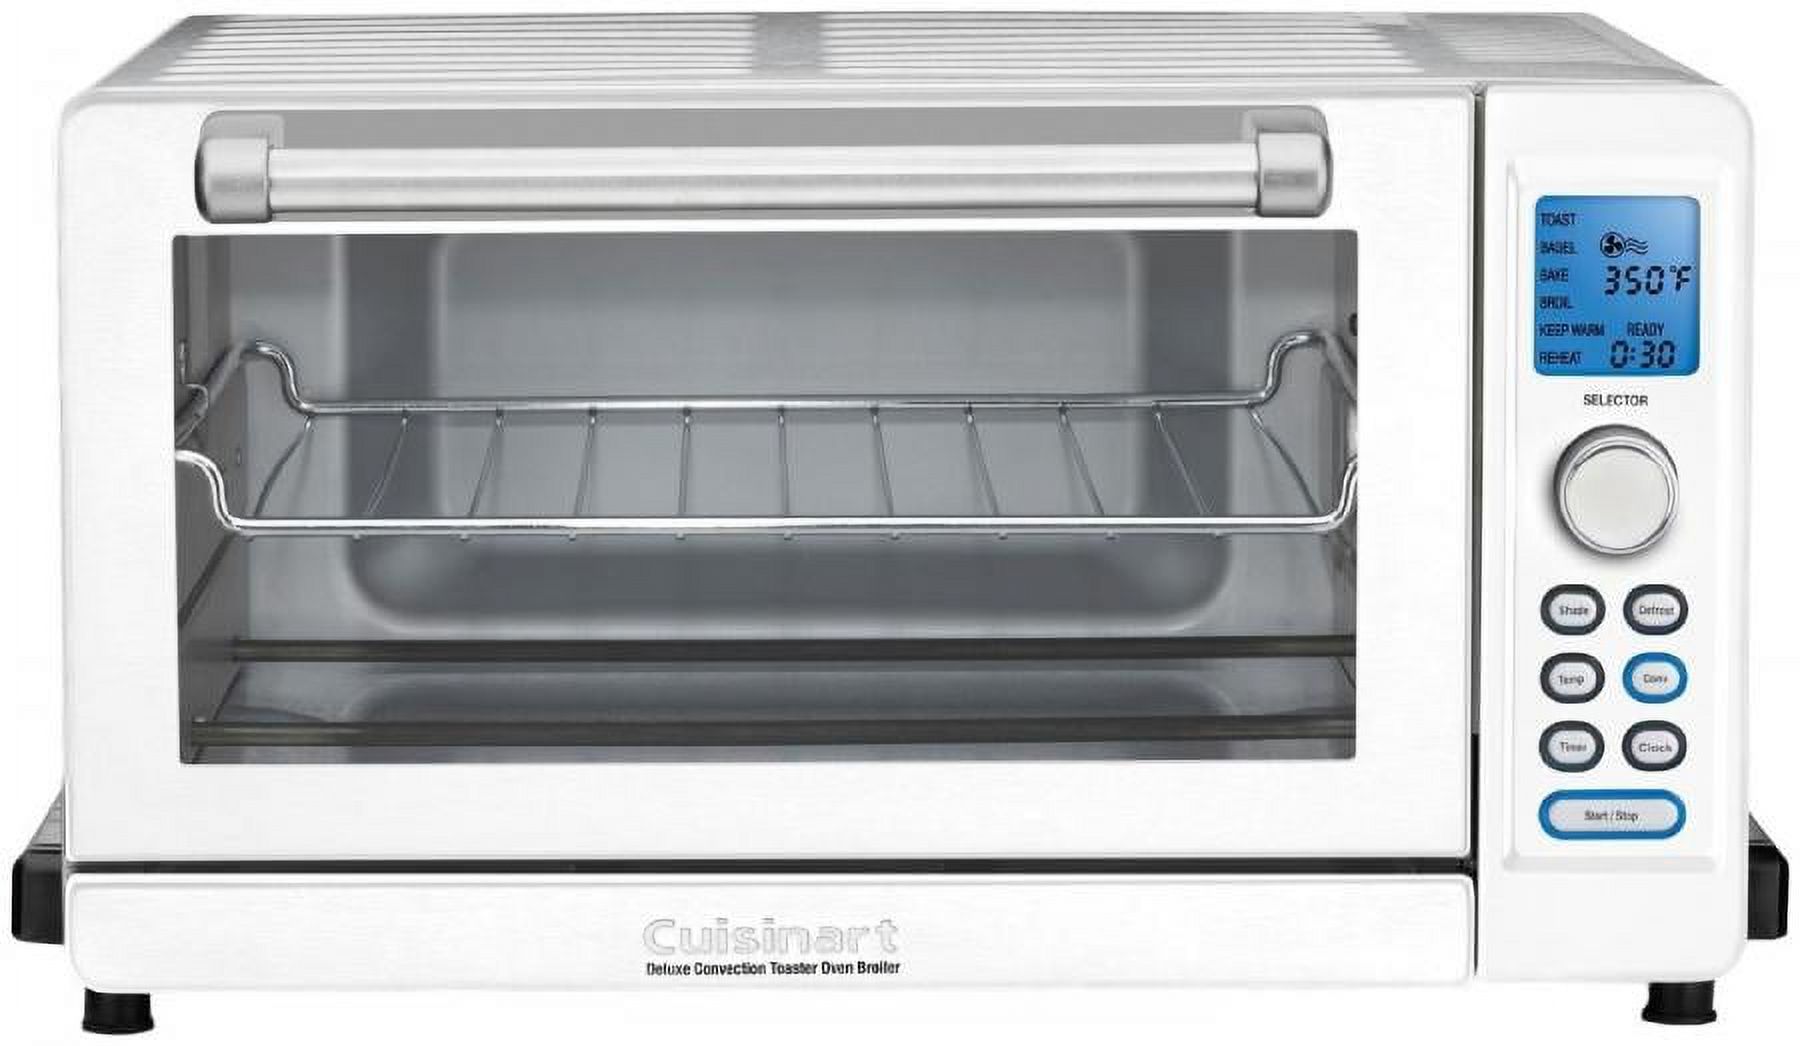 Cuisinart TOB-135WN Deluxe Convection Toaster Oven Broiler, Stainless Steel - image 1 of 3